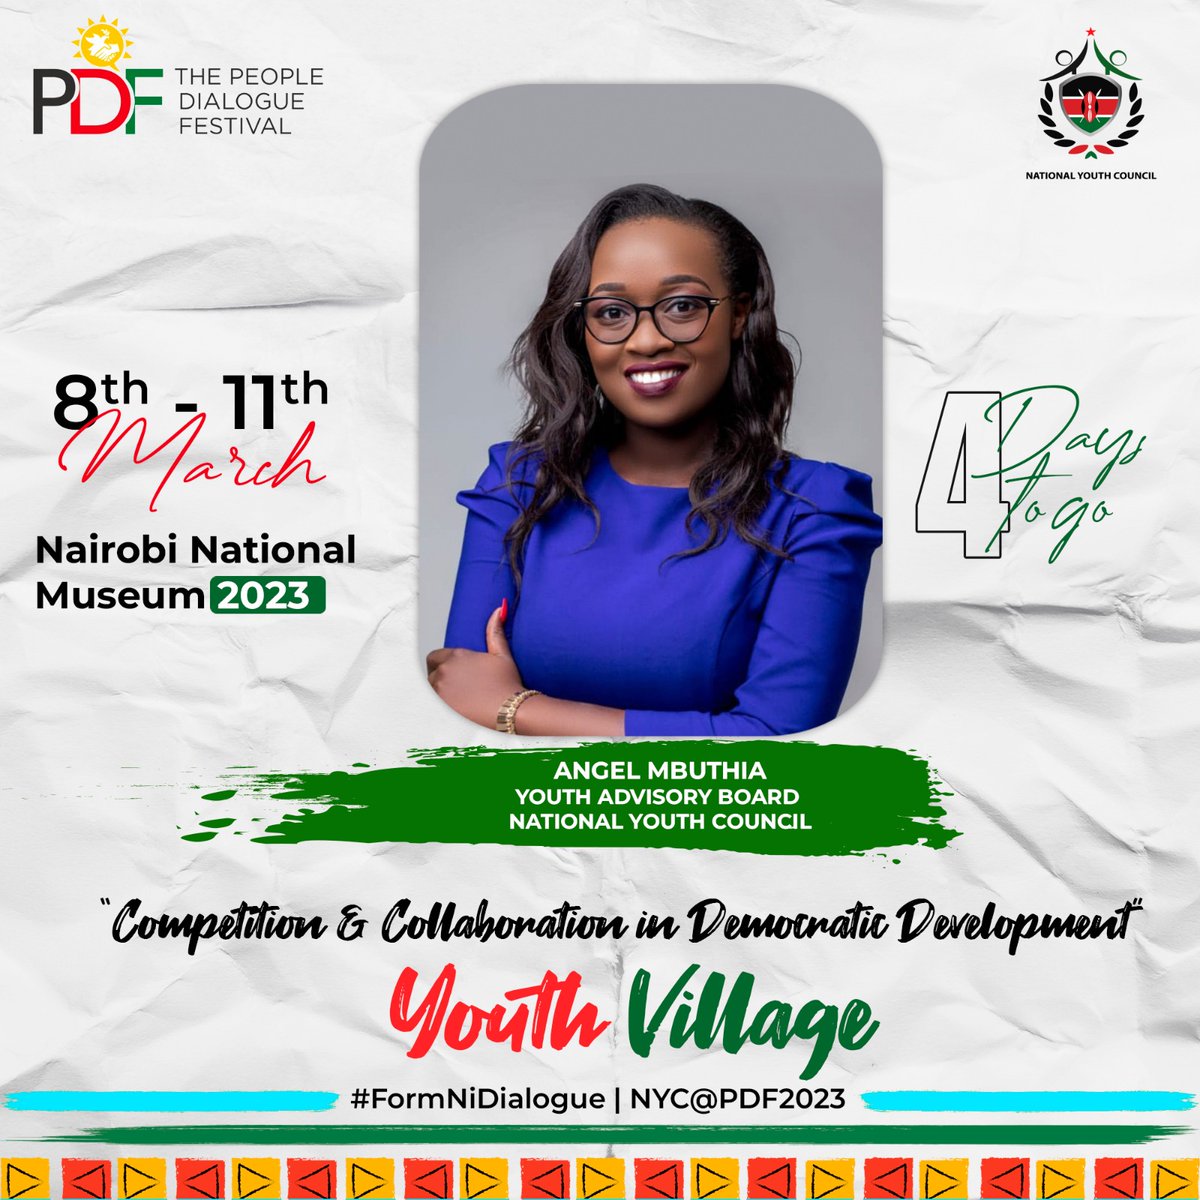 Do you wanna meet and converse with #MsPresident winner & YAB director, Ms. @AngelMbuthia?
 
See you at the Youth Village for a speed date session- Legislatures Edition.

🎤 People Dialogue Festival 
📆8th to 11th March 2️⃣0️⃣2️⃣3️⃣
📍Nairobi National Museum
Entry is absolutely FREE!